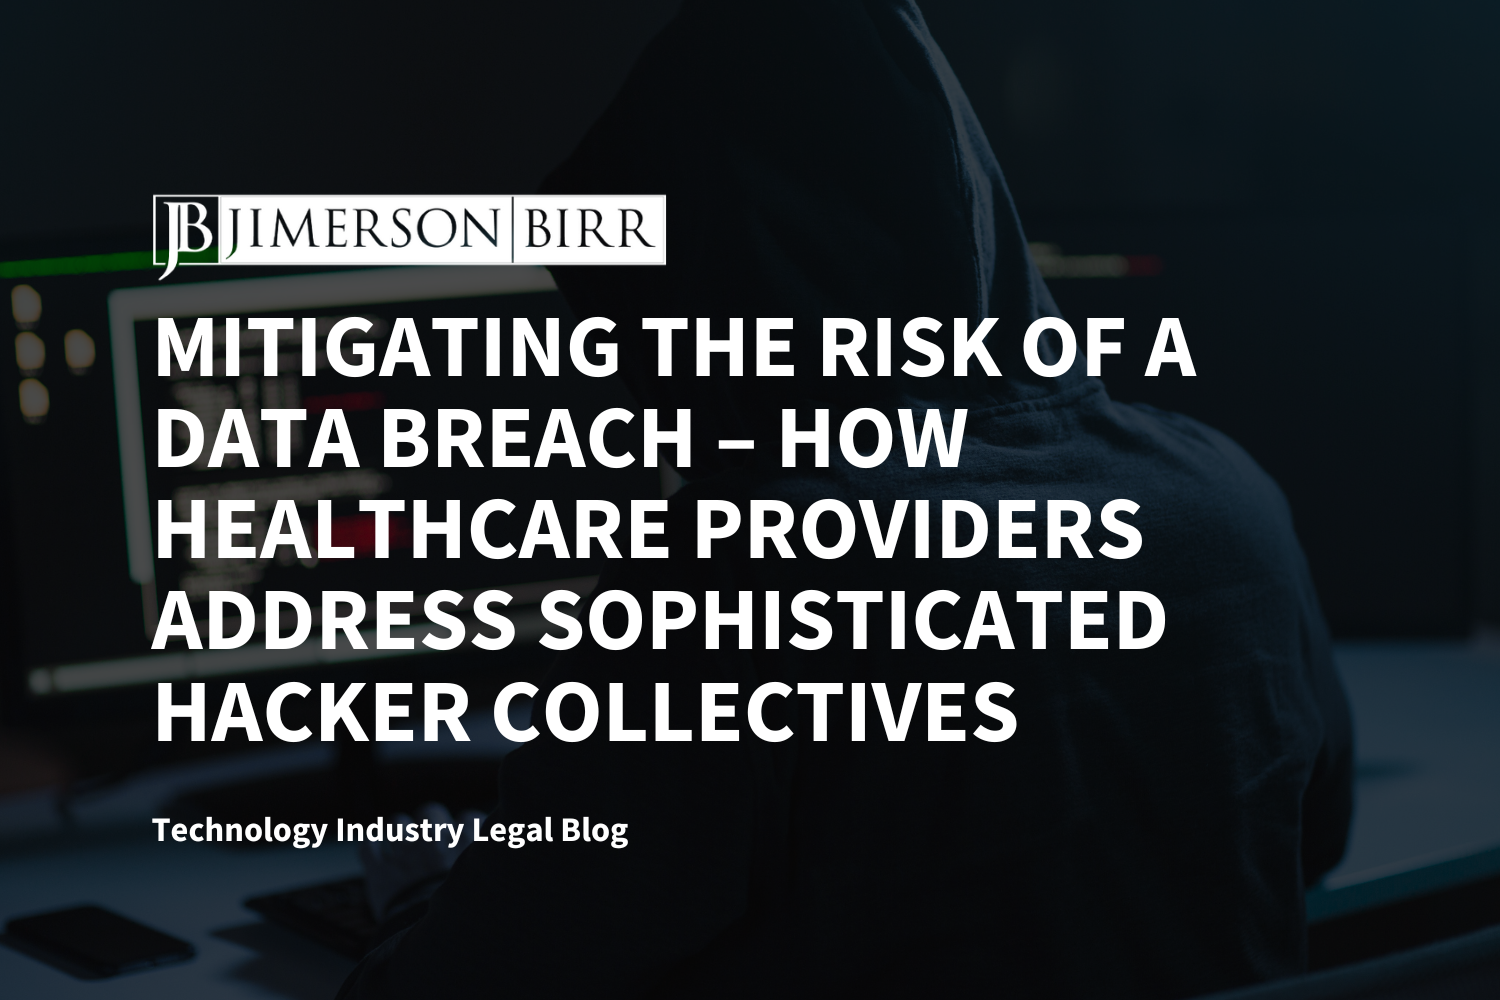 Mitigating the Risk of a Data Breach – How Healthcare Providers Address Sophisticated Hacker Collectives